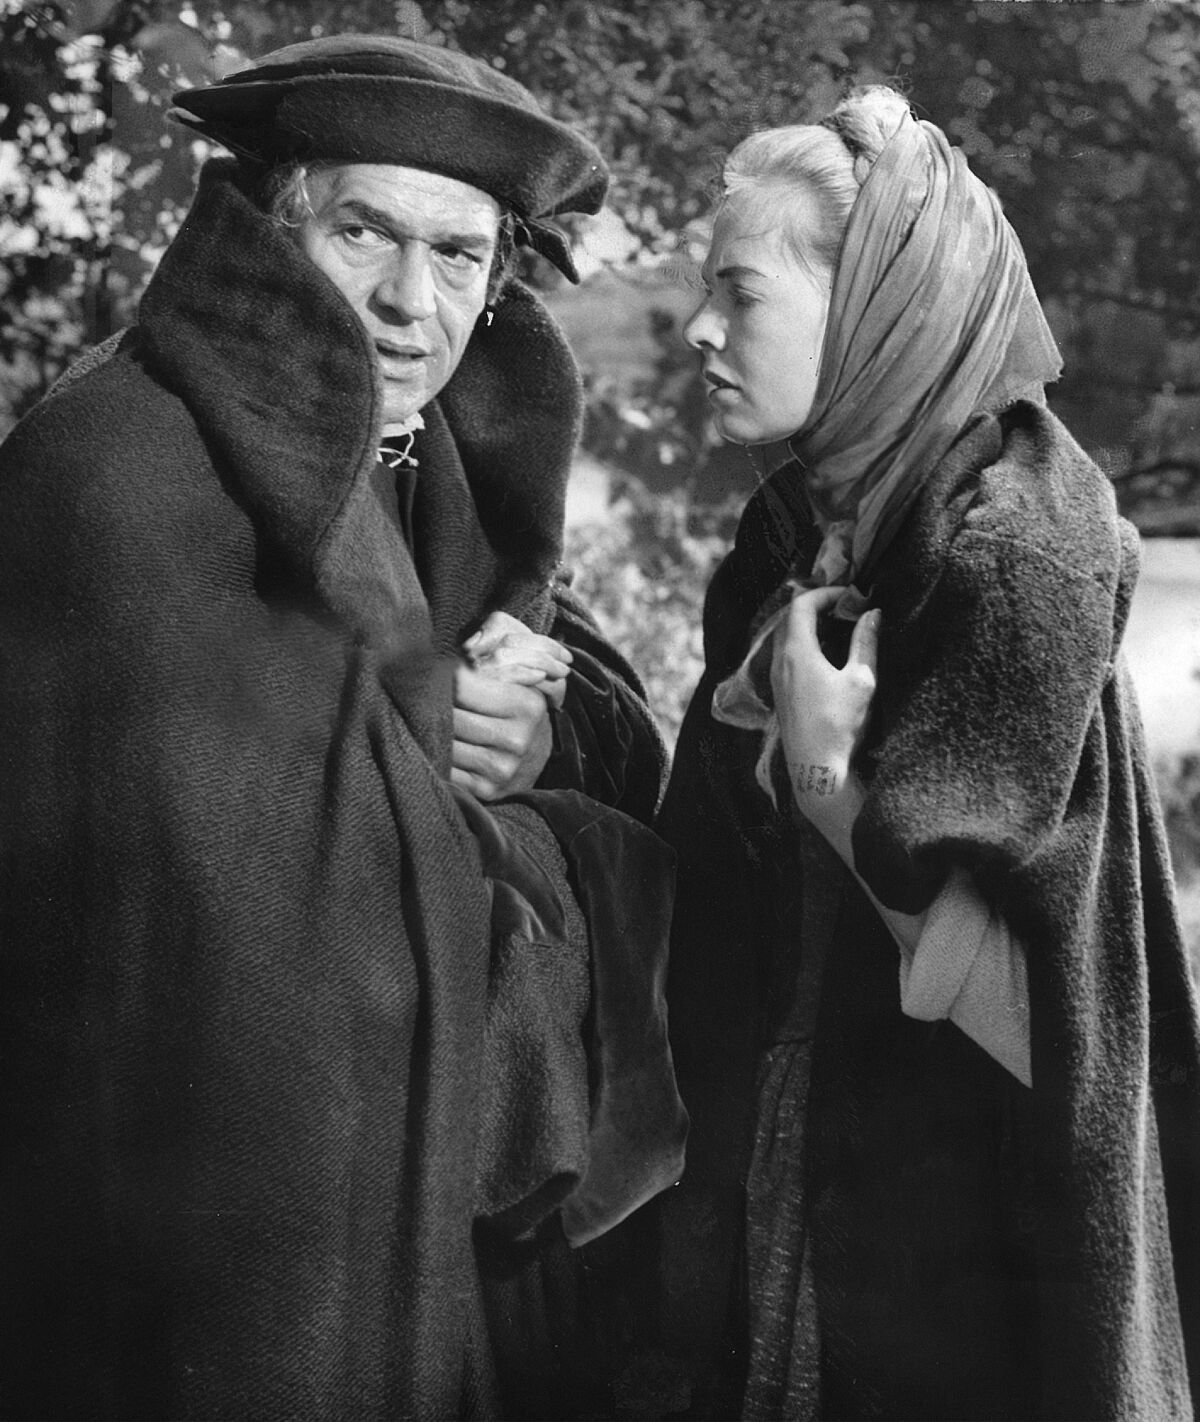 black and white photo of a man and a woman bundled up in coats